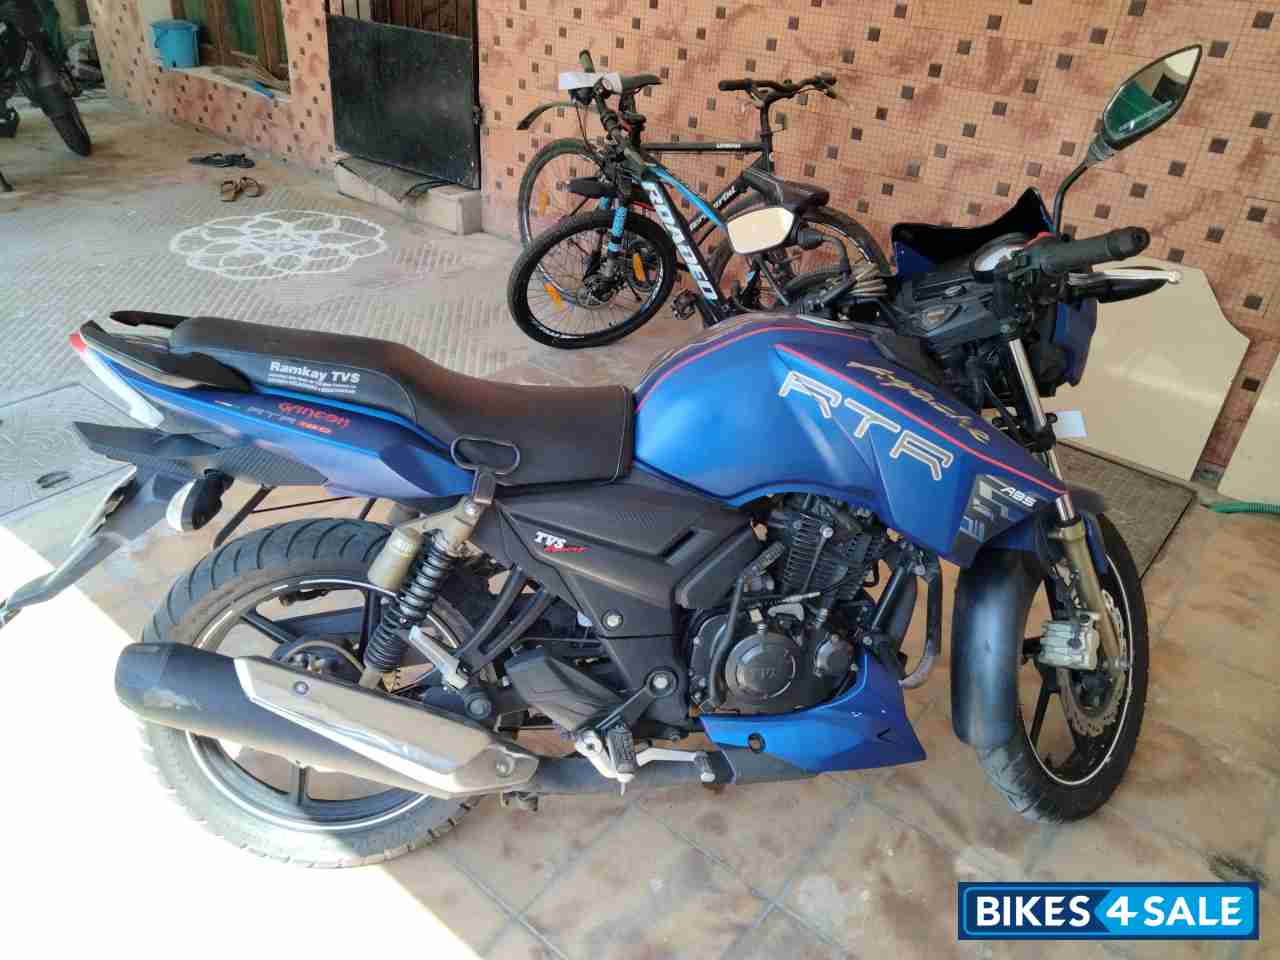 Used 2016 model TVS Apache RTR 180 ABS for sale in Chennai ...